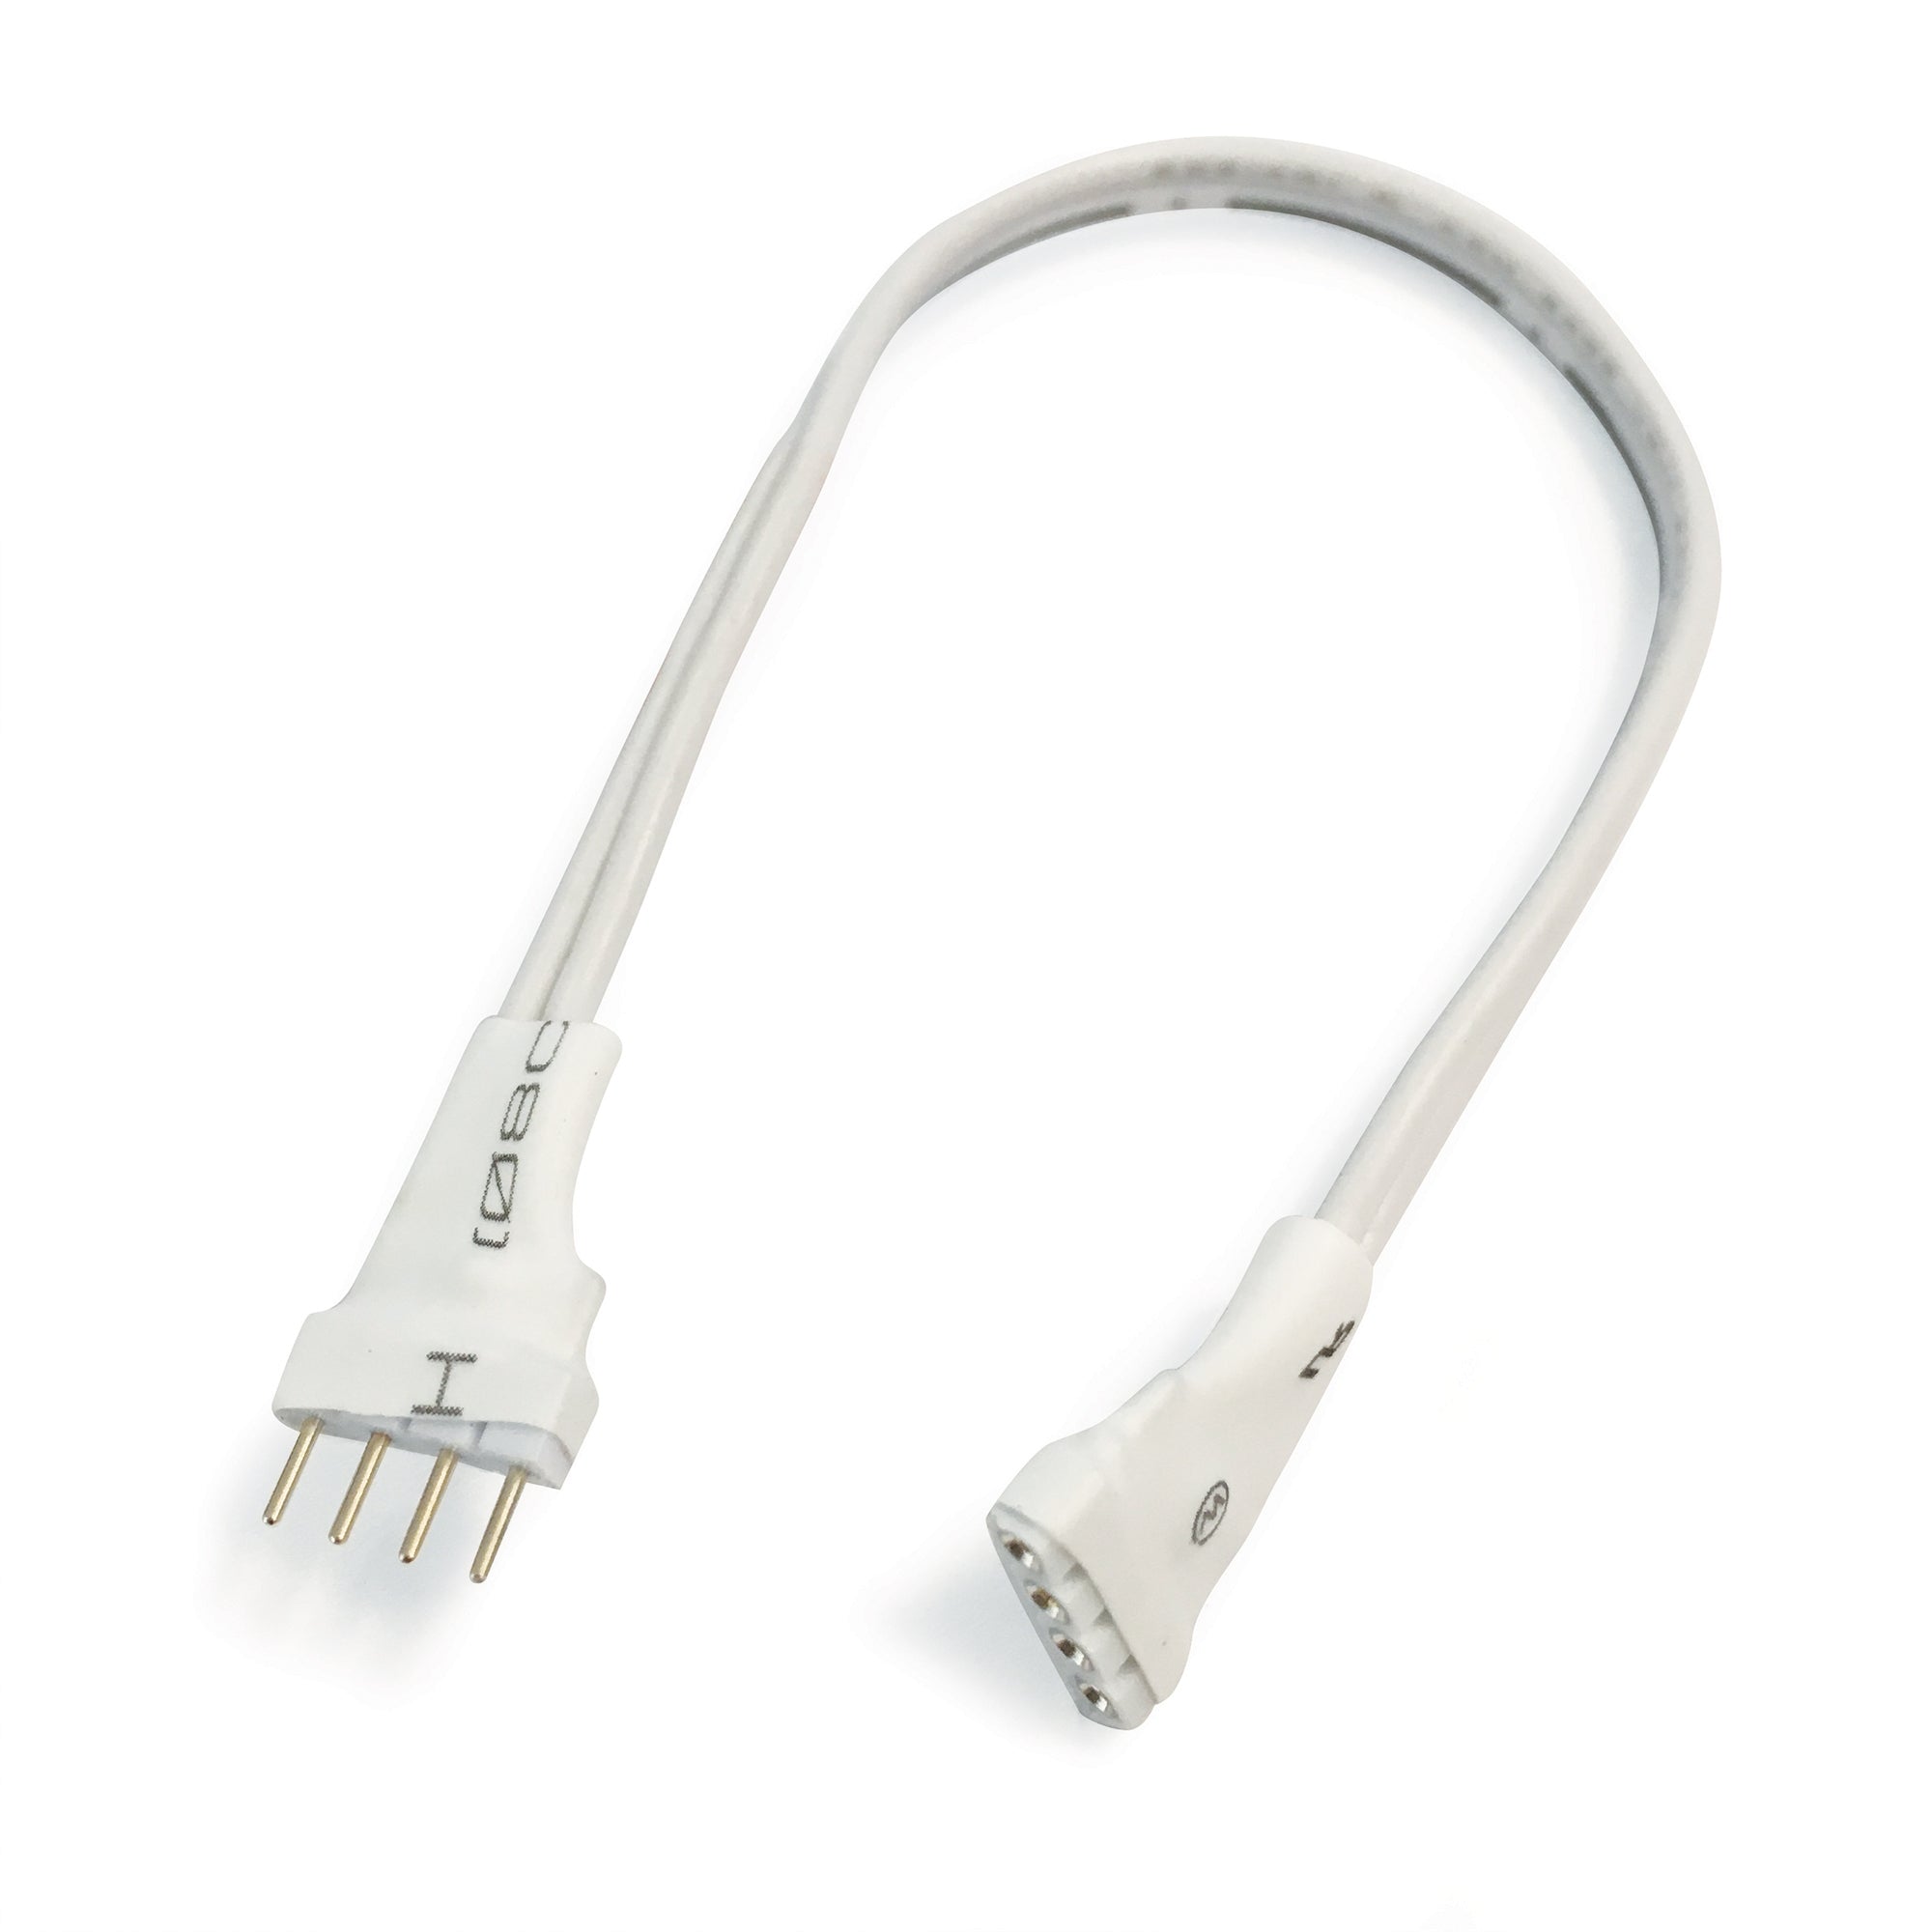 Nora Lighting NARGB-736W - Accent / Undercabinet - 36 Inch Interconnection Cable for 12V or 24V RGB & CCT Tape Light